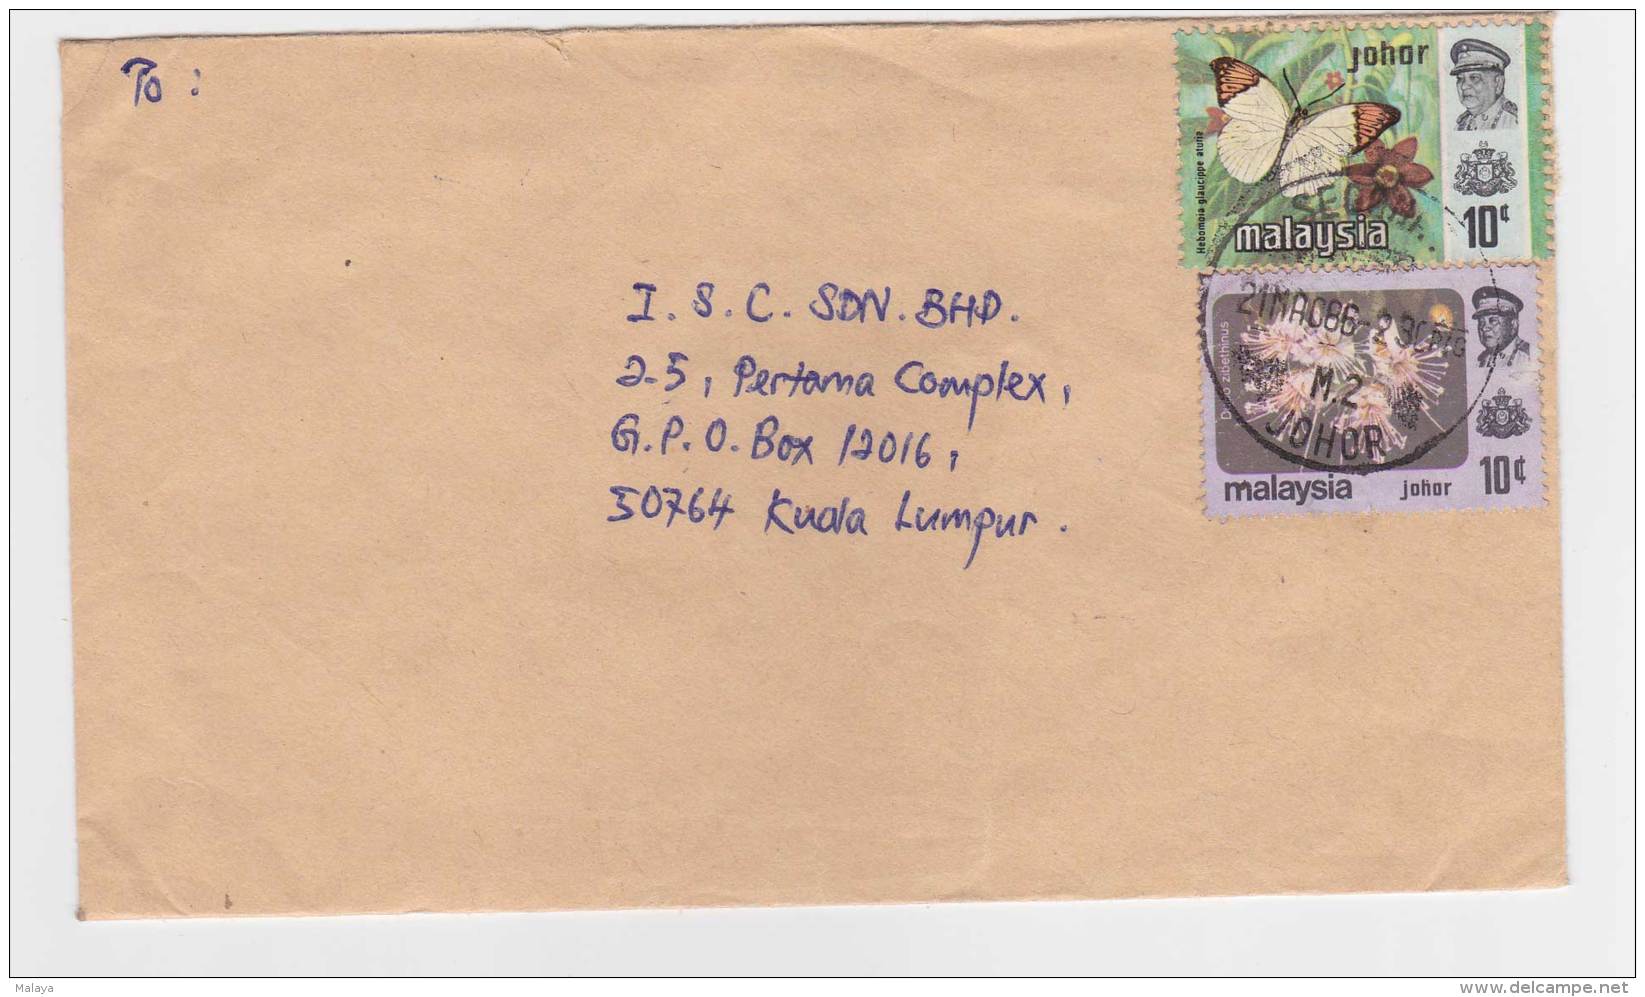 Malaysia Harrison Butterflies Johore 10c 1978 Letter Postal Cover History Sultan With Flowers Stamp - Malaysia (1964-...)